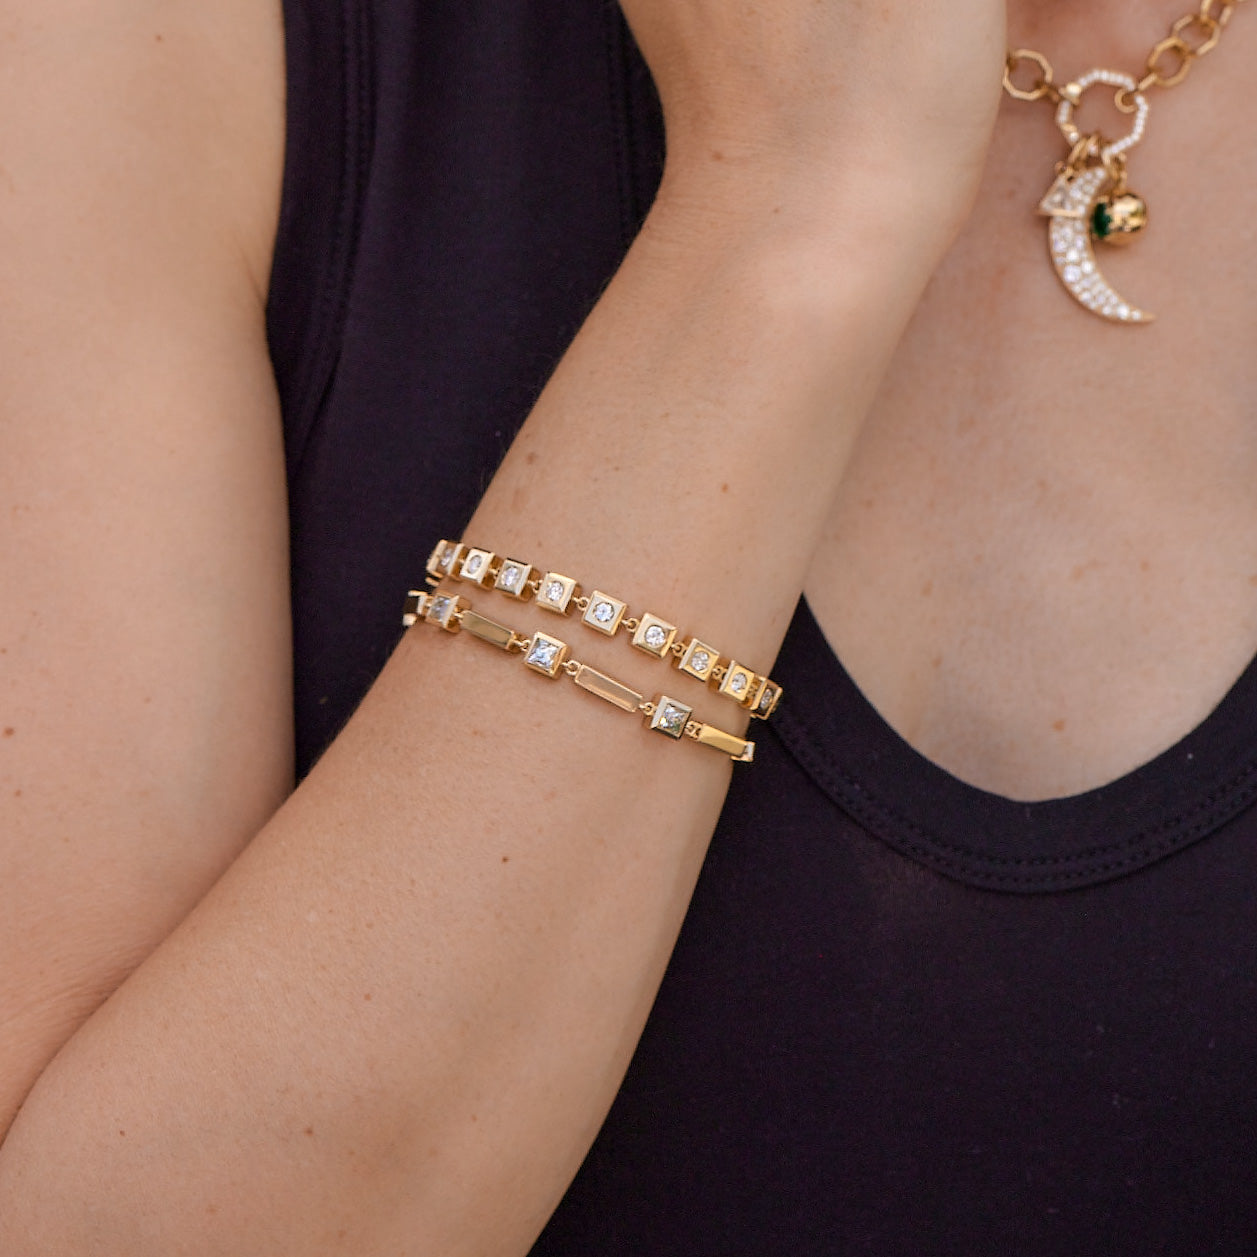 Woman's arm wearing two gold and diamond tennis bracelets from the Single Stone collection